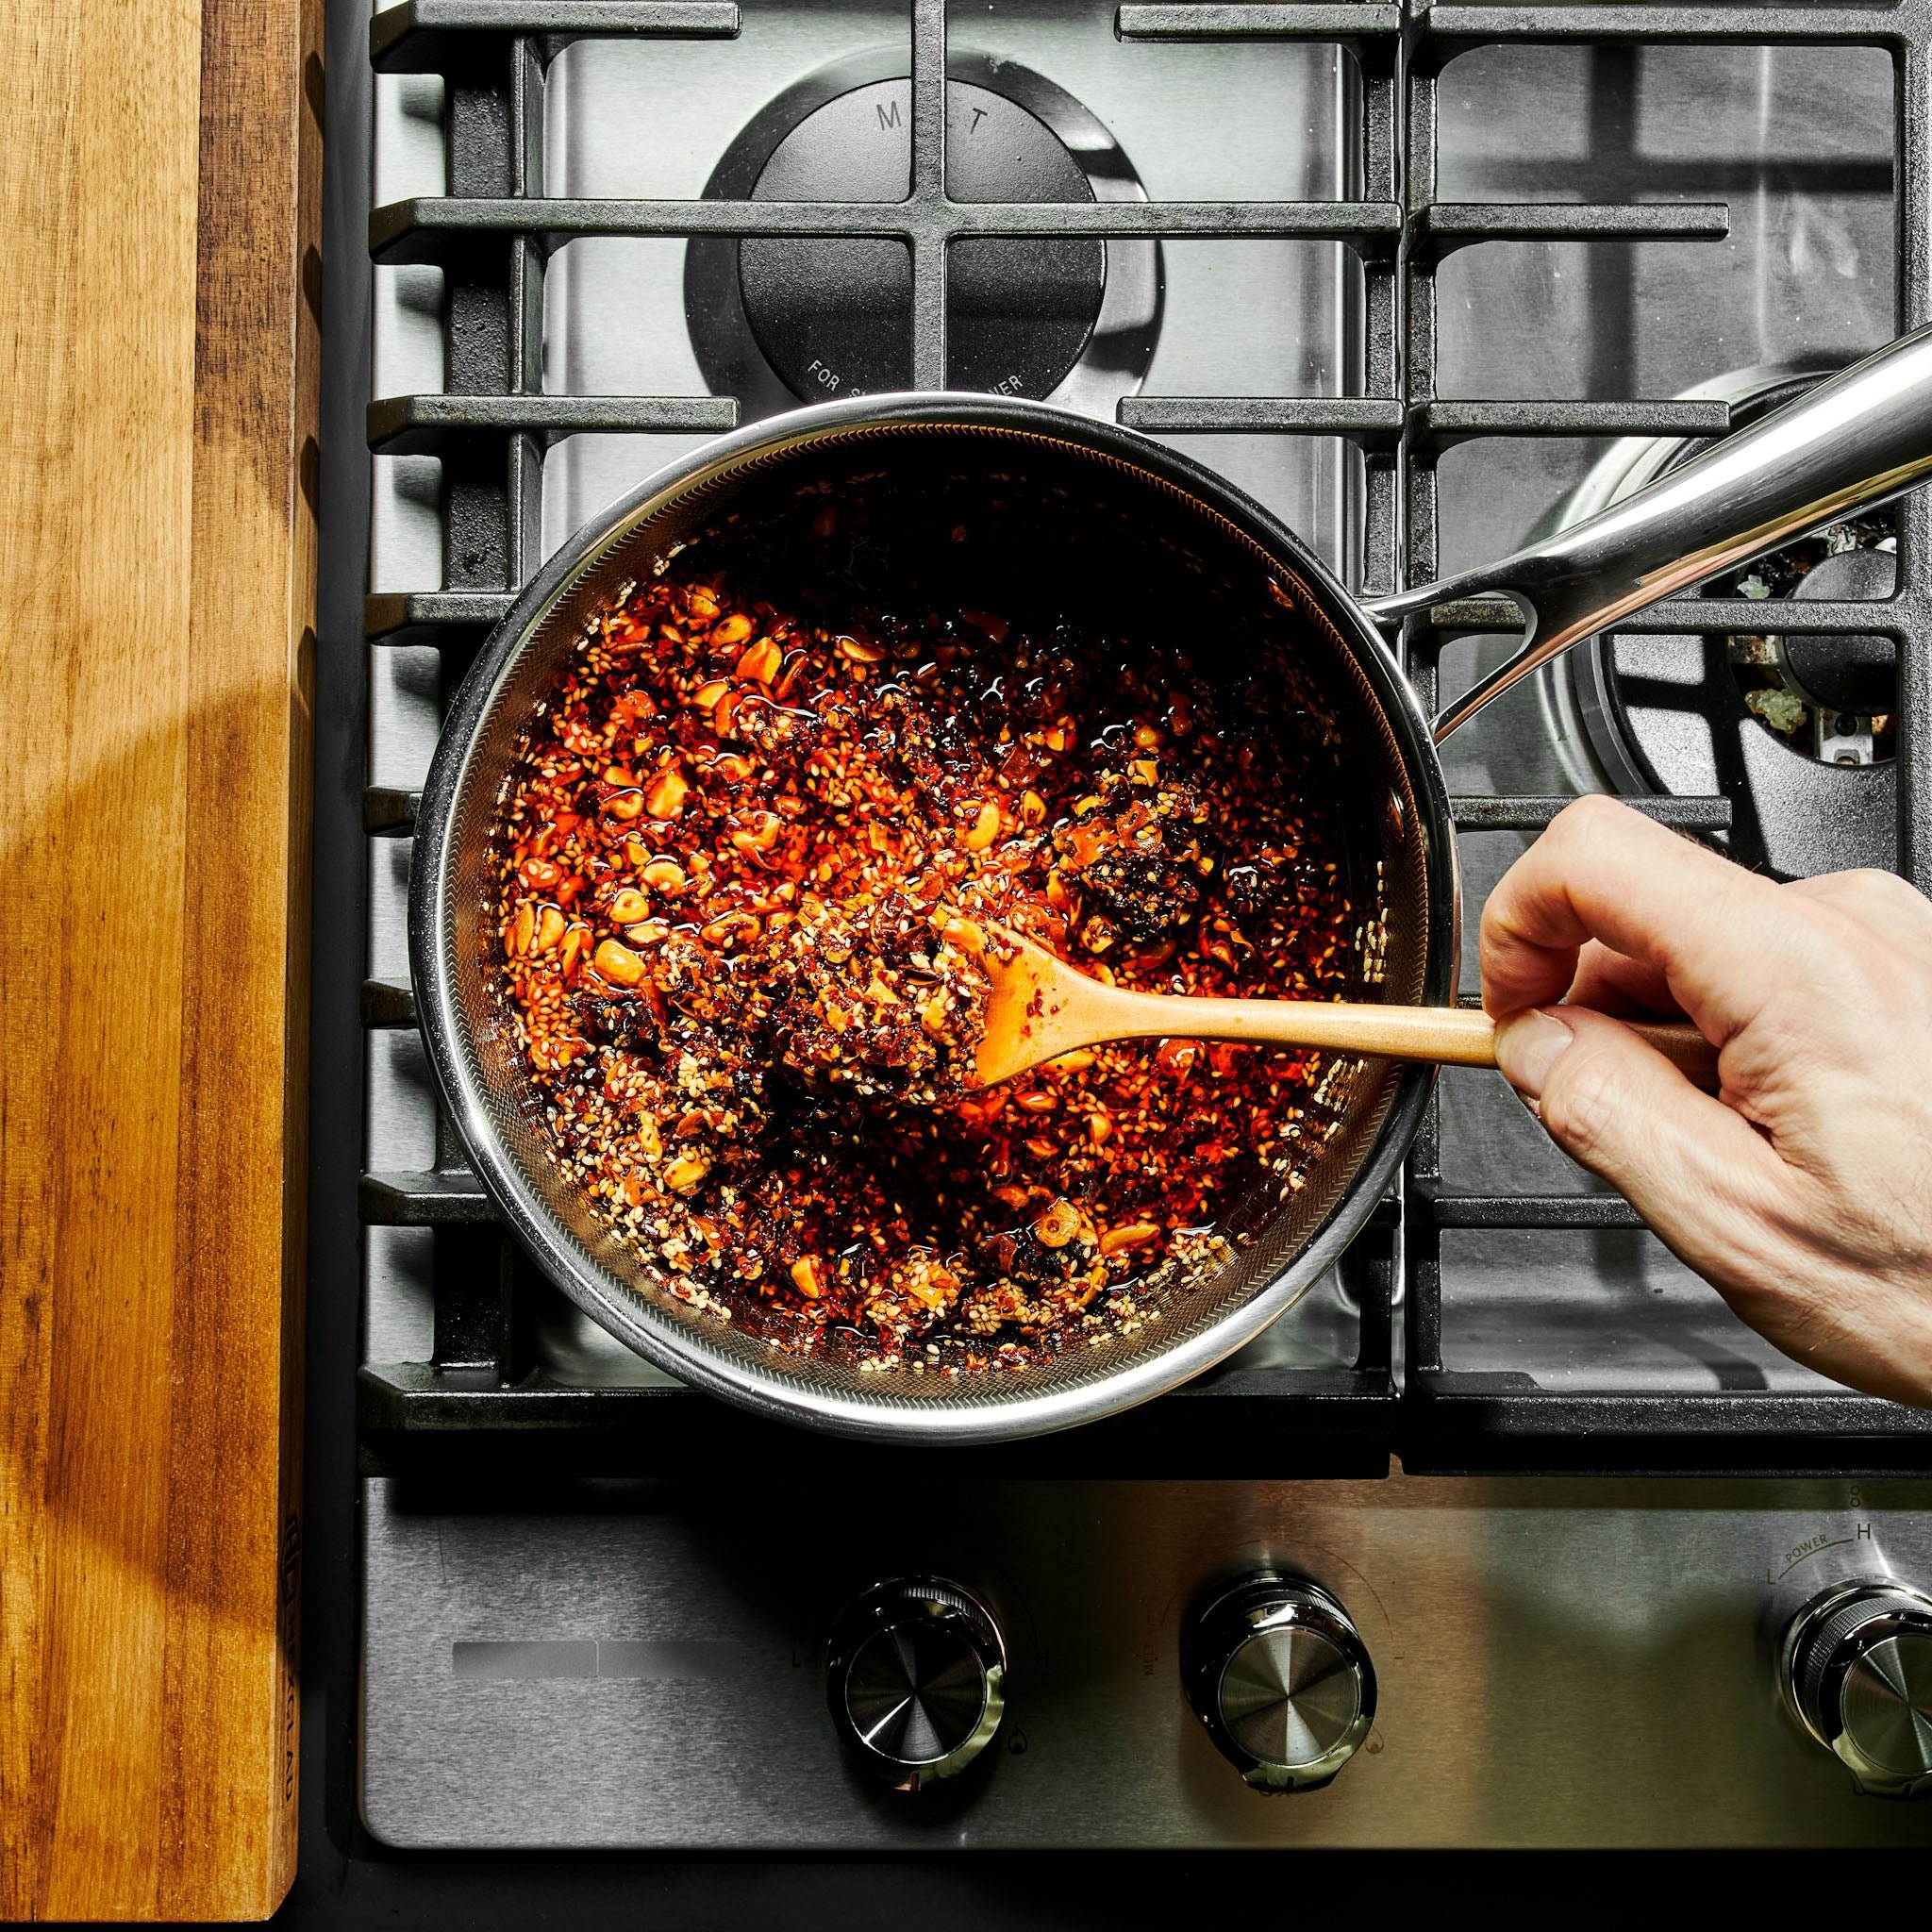 Person stirring a mixture of spices and oil in a frying pan on a stovetop.